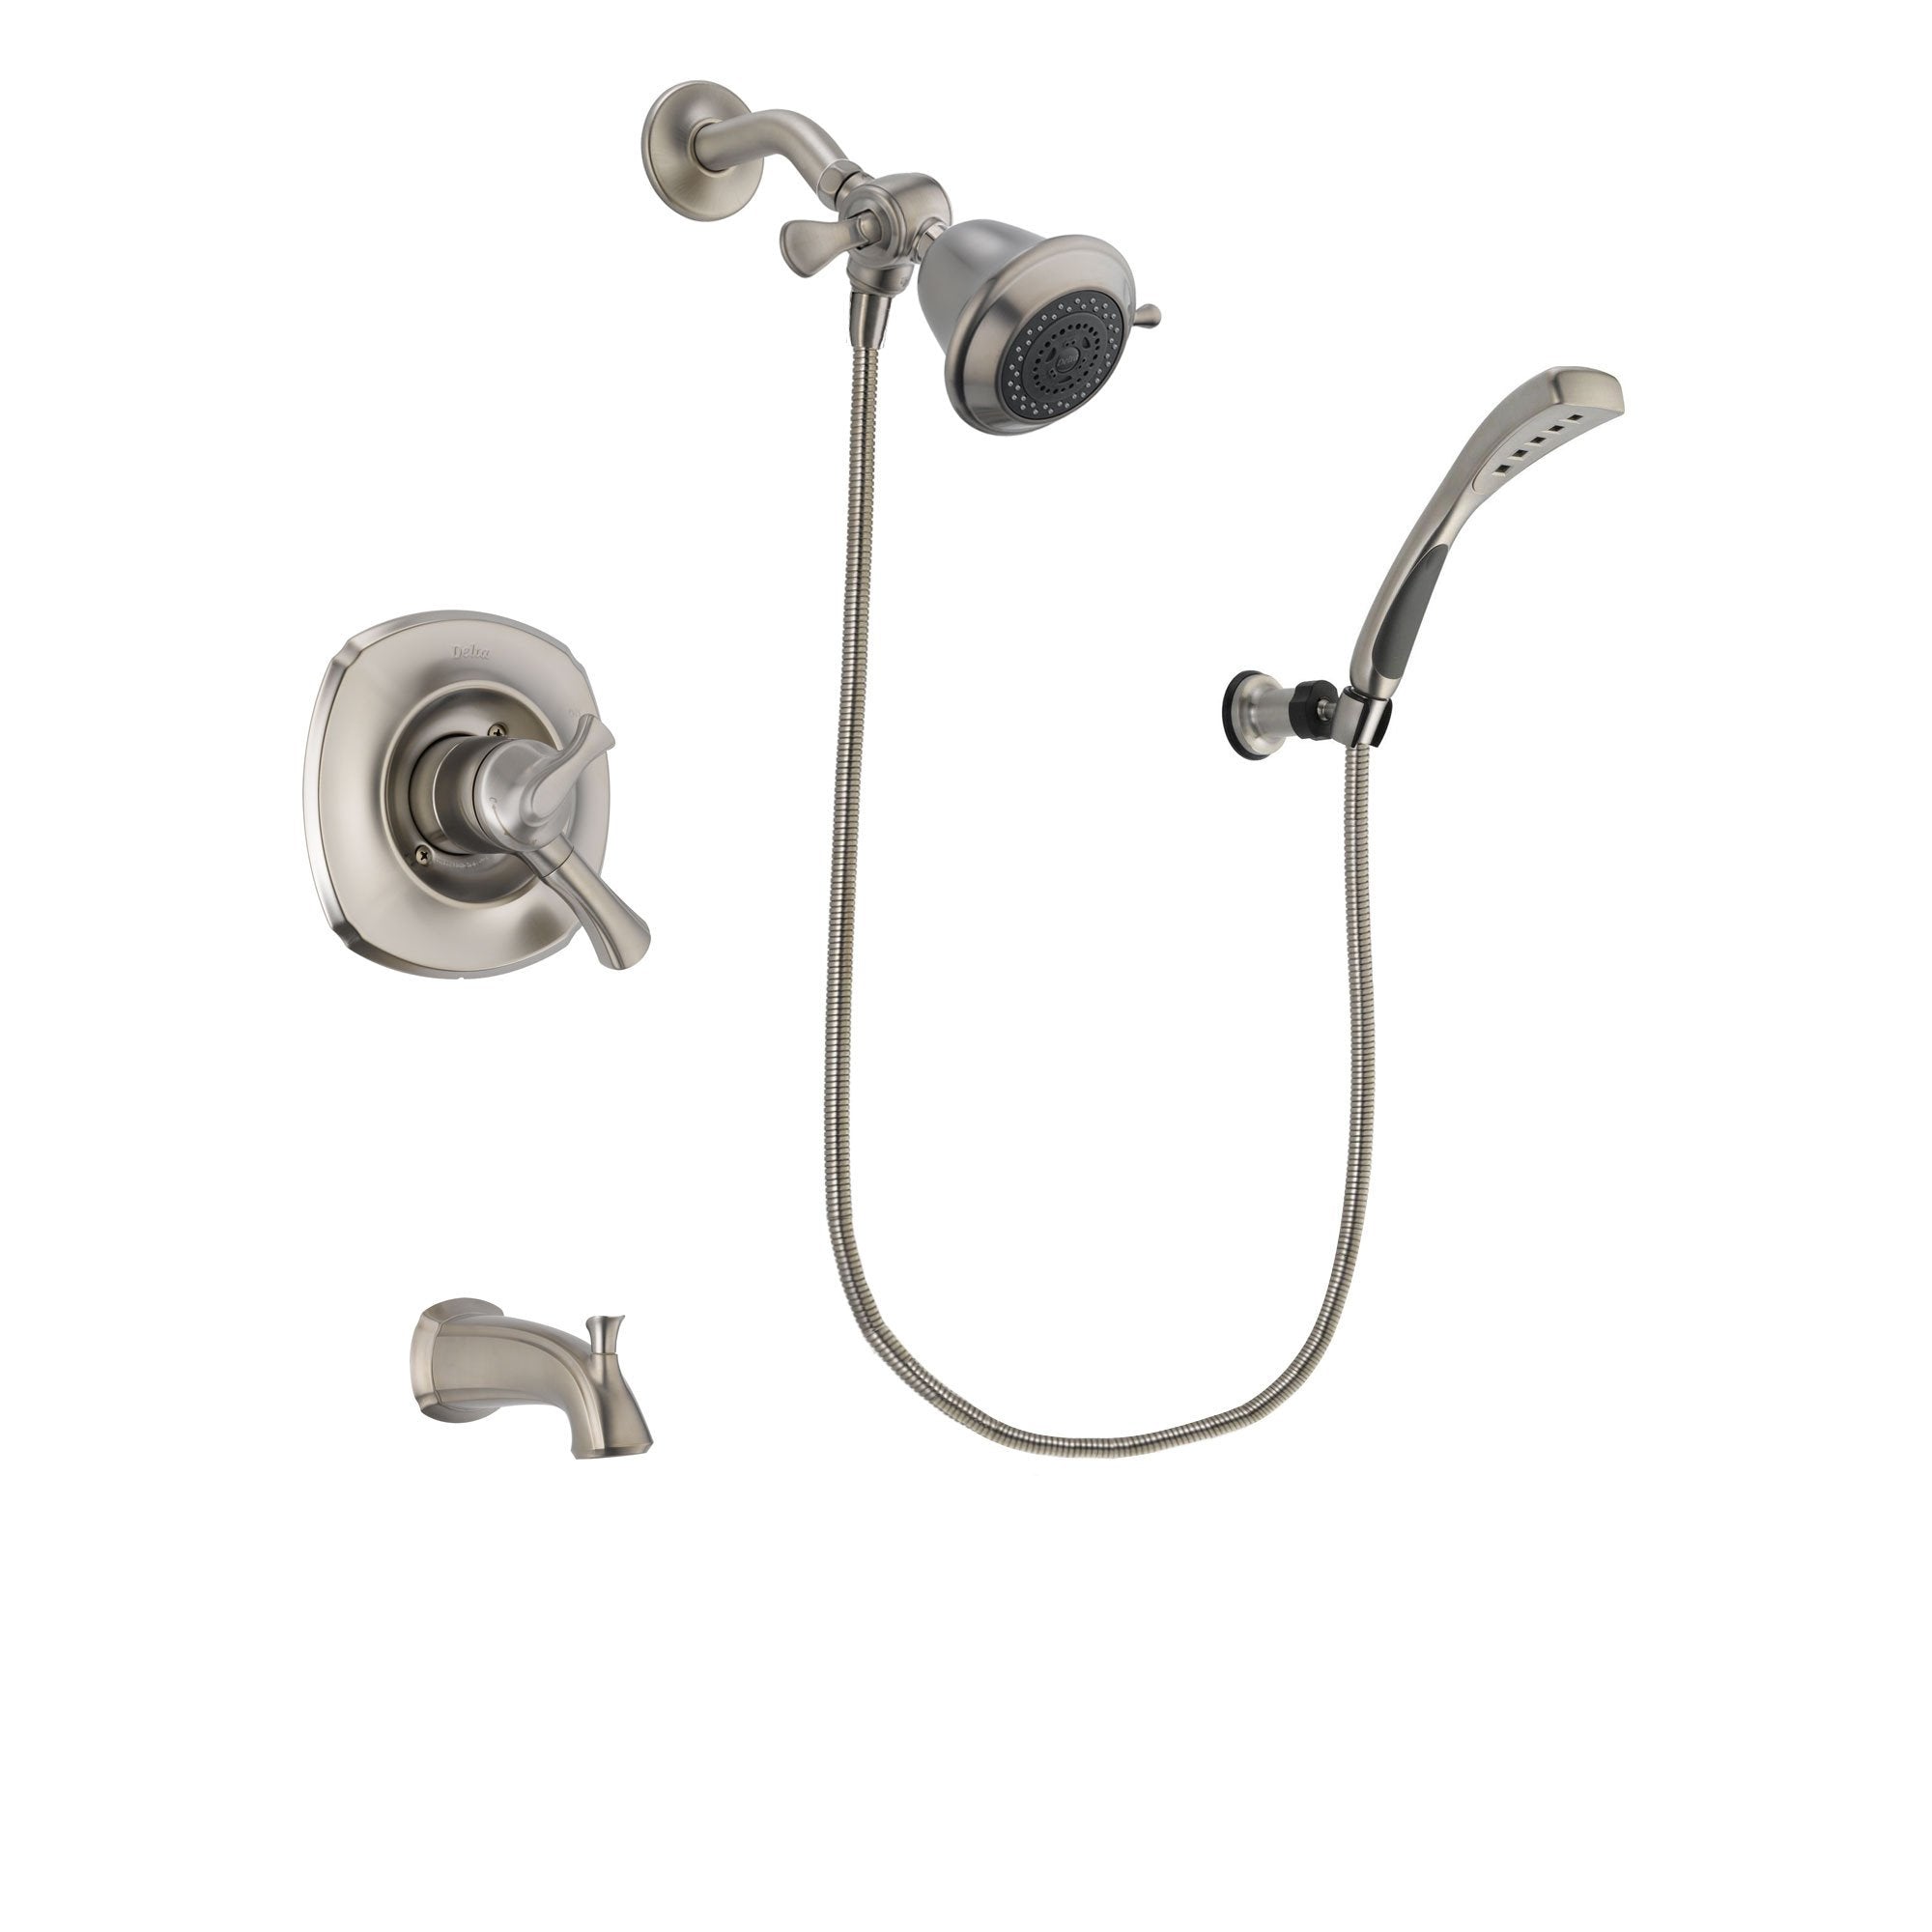 Delta Addison Stainless Steel Finish Dual Control Tub and Shower Faucet System Package with Shower Head and Wall Mounted Handshower Includes Rough-in Valve and Tub Spout DSP1813V